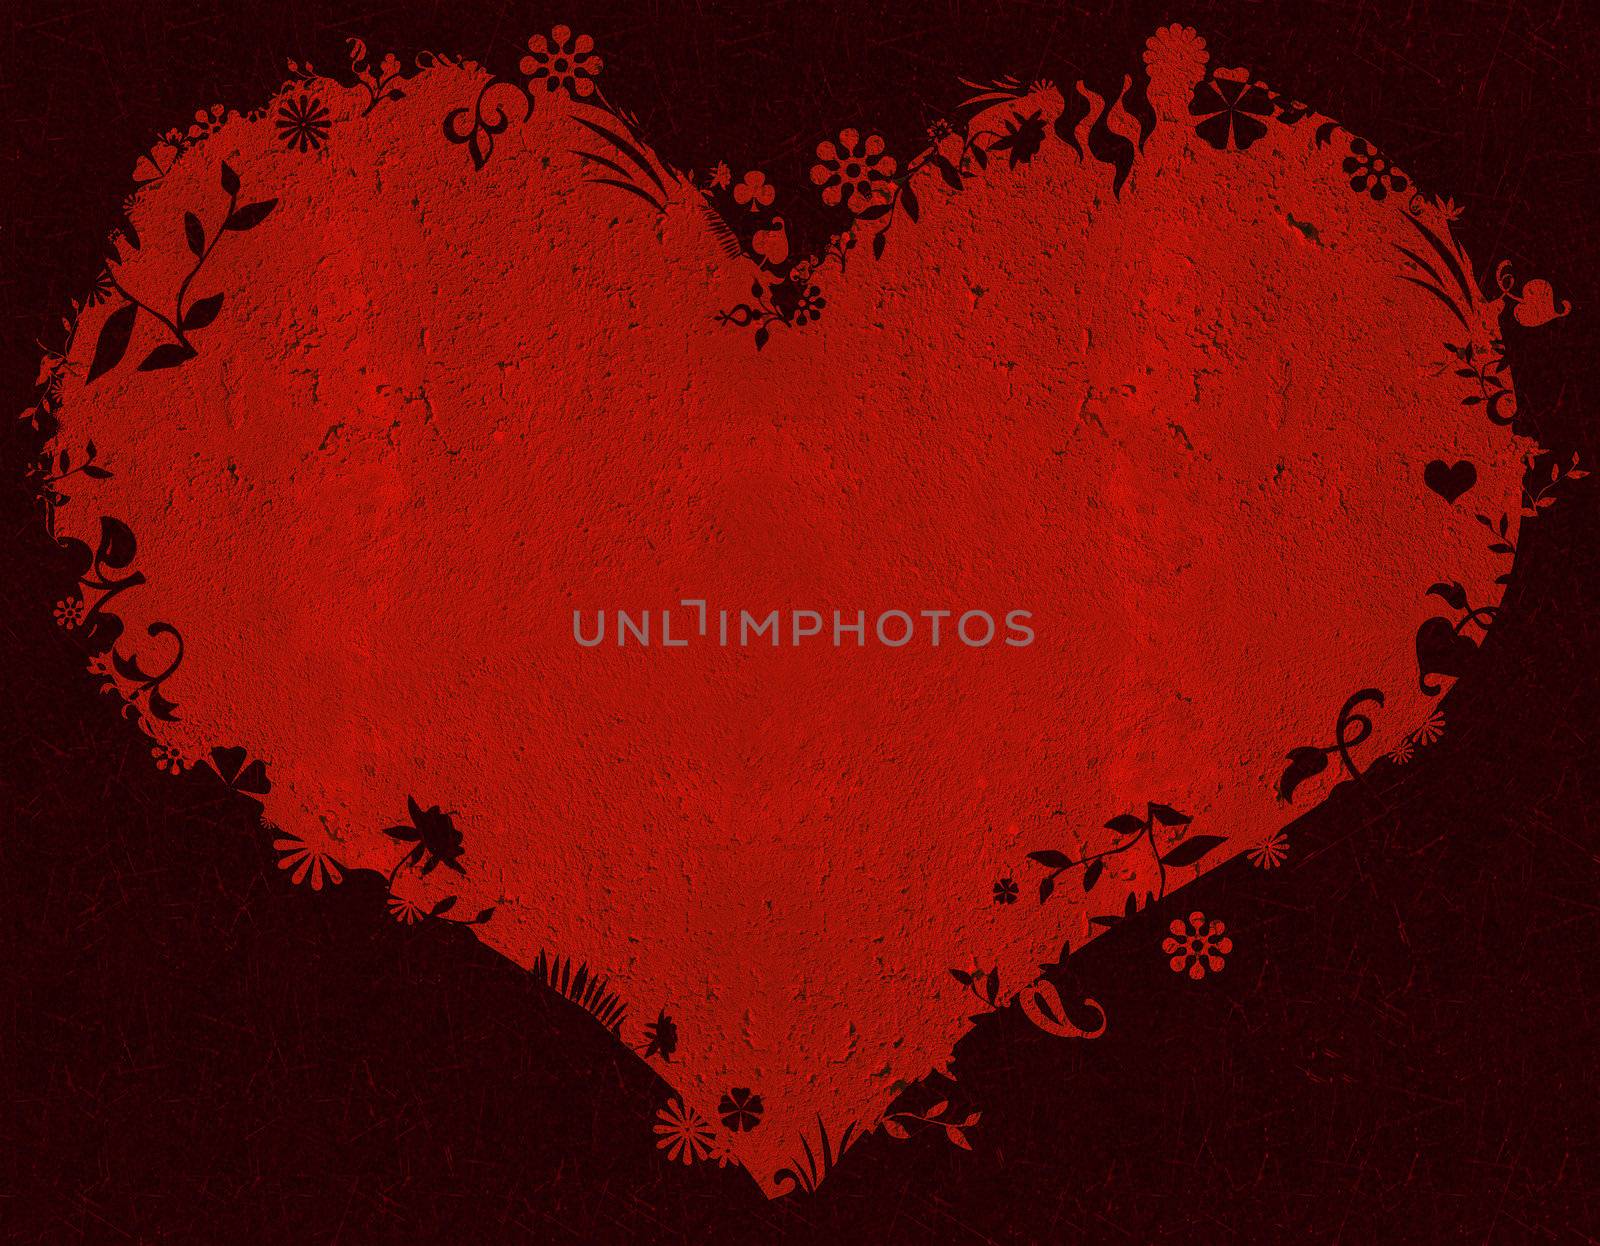 Grunge, floral heart background with texture illustration